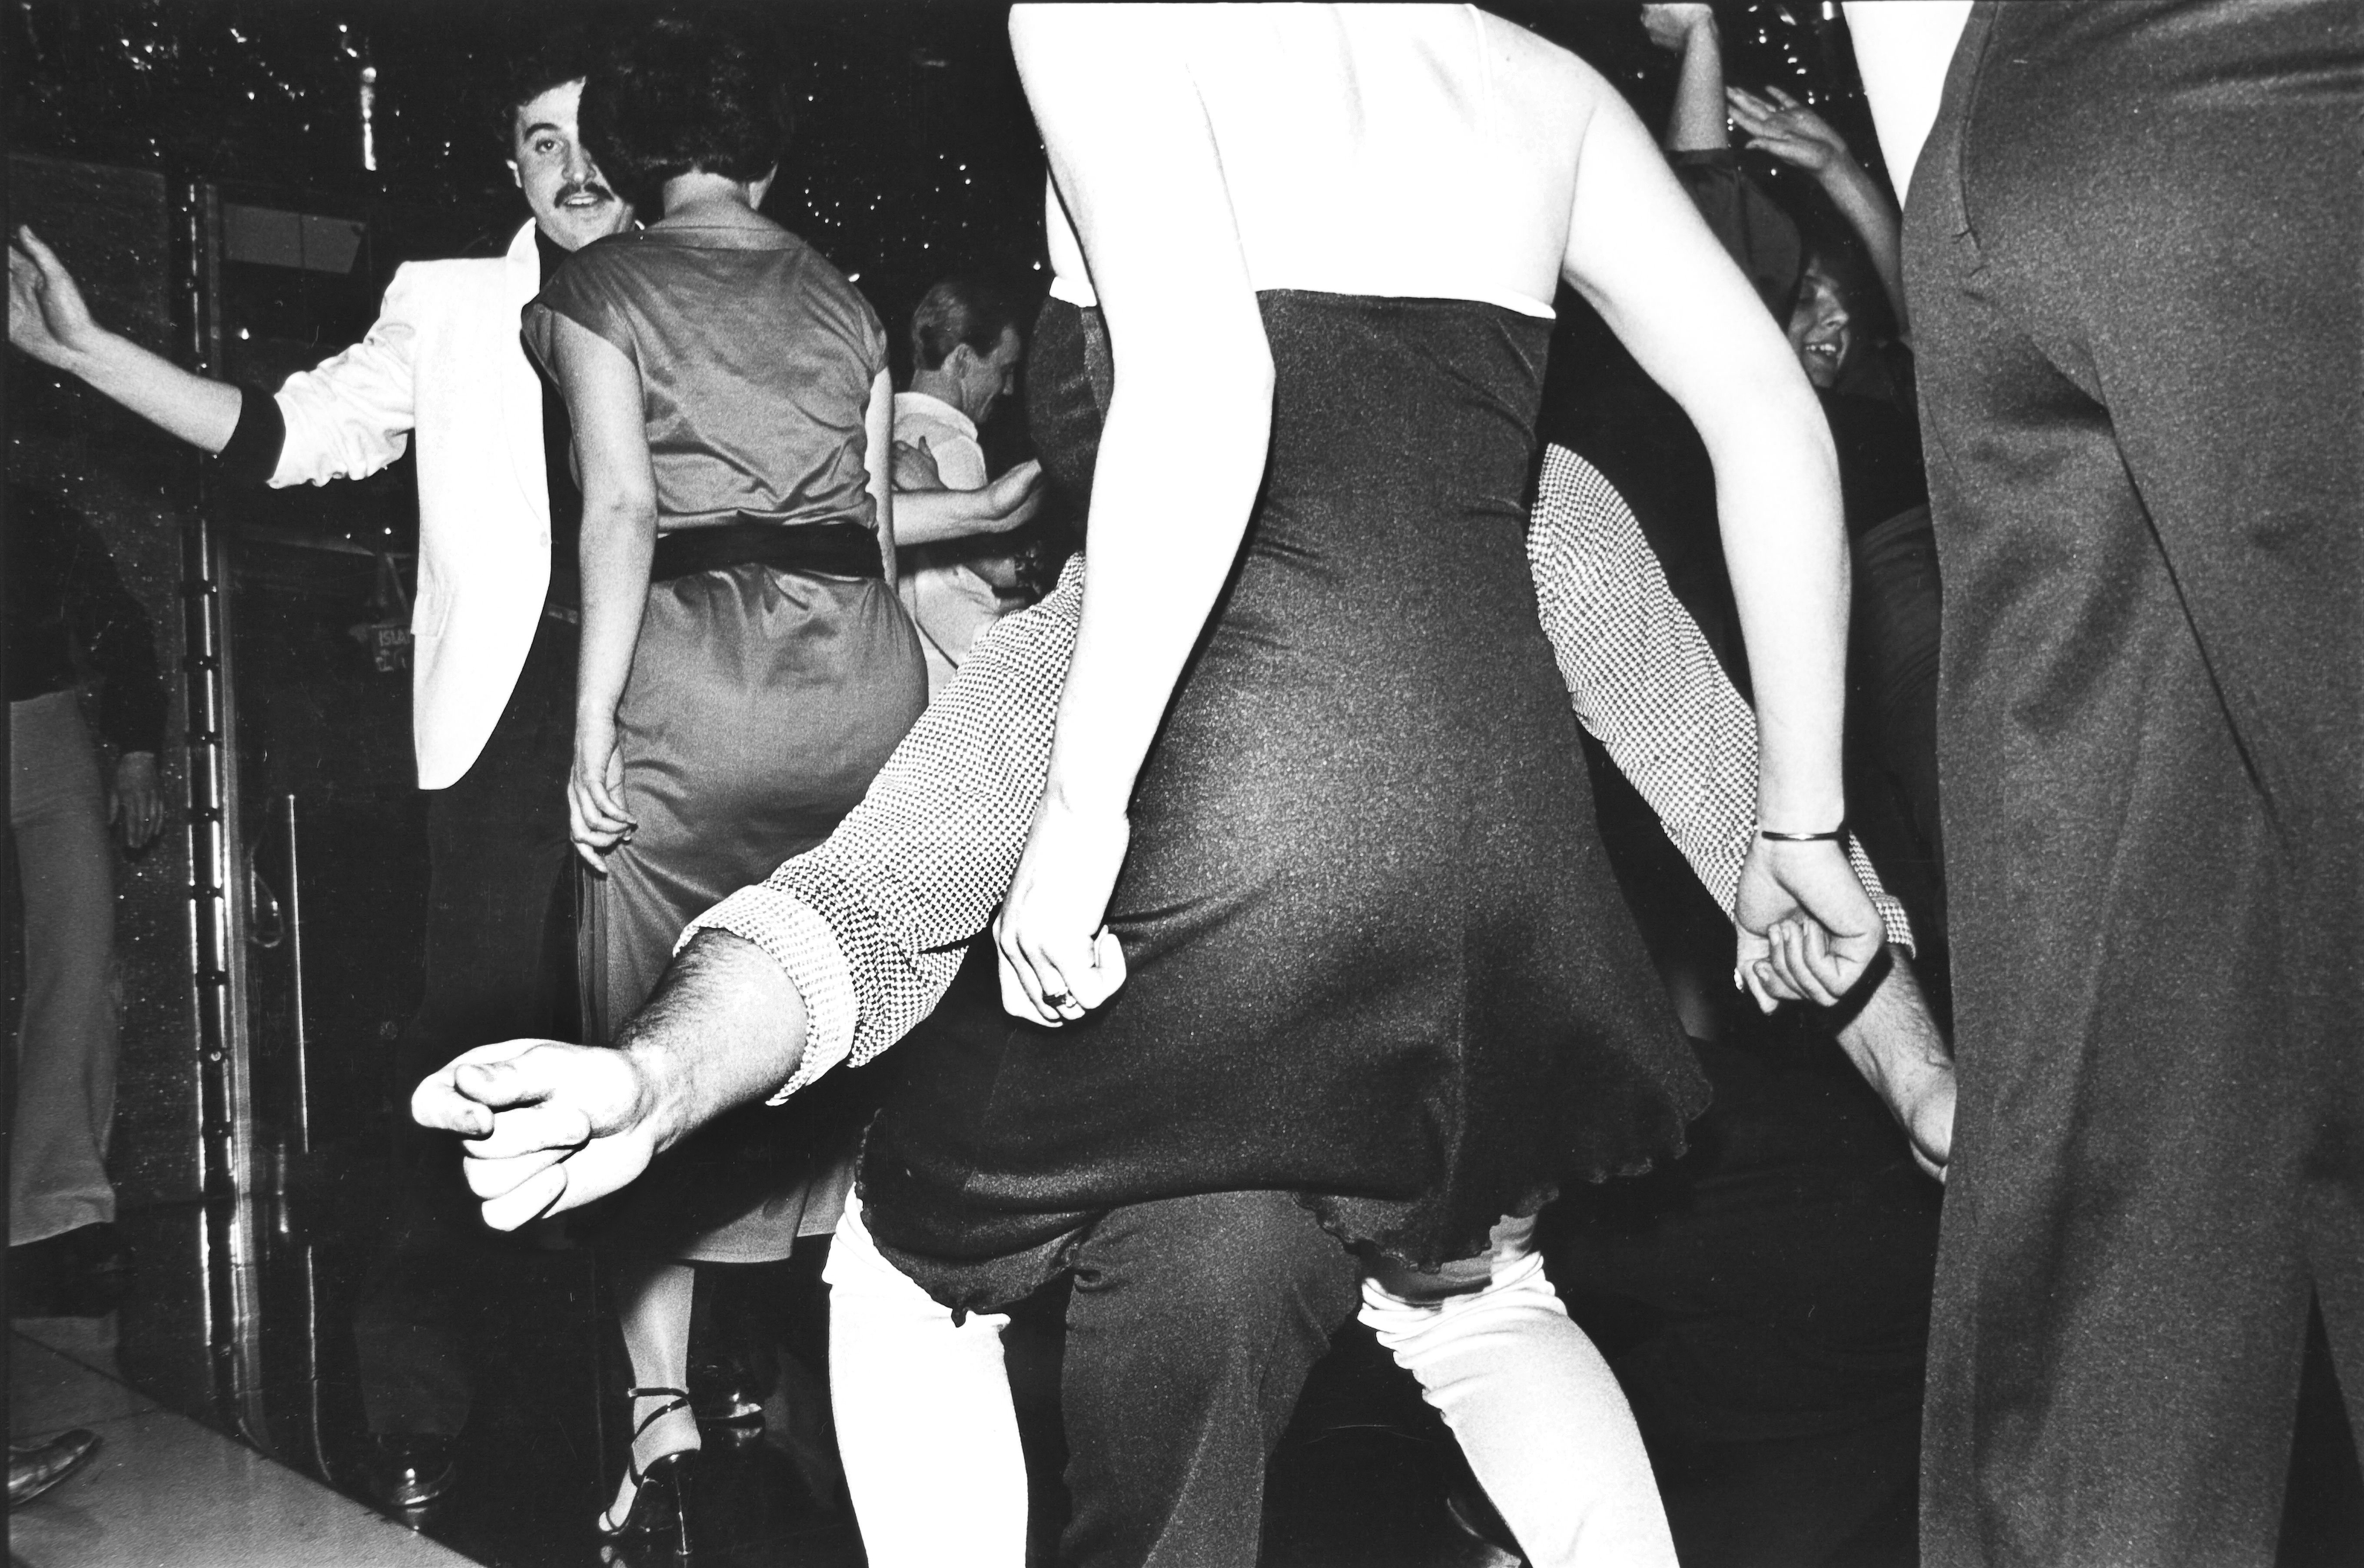 Tony_Ward_photography_early_work_Night_Fever_portfolio_1970's_erotic_dirty_dancing_couples_grinding